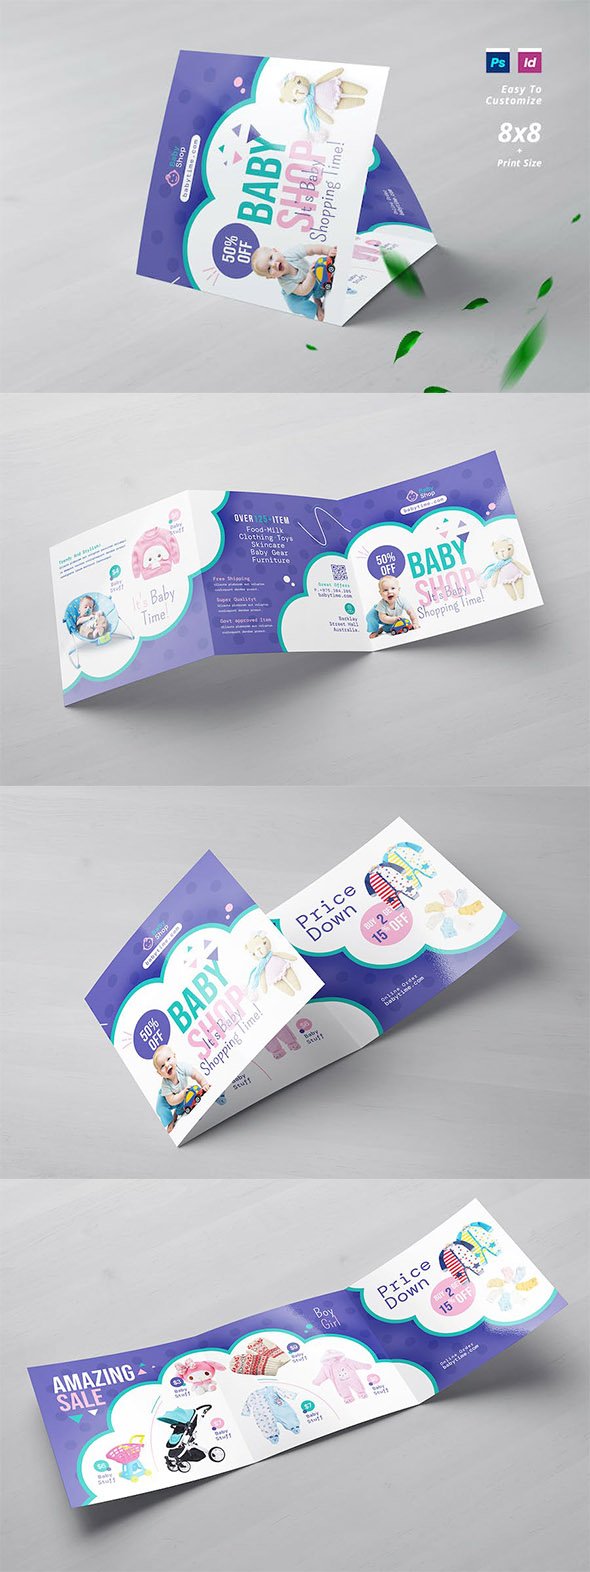 Baby Shop Square Trifold Brochure - VGSE7CU